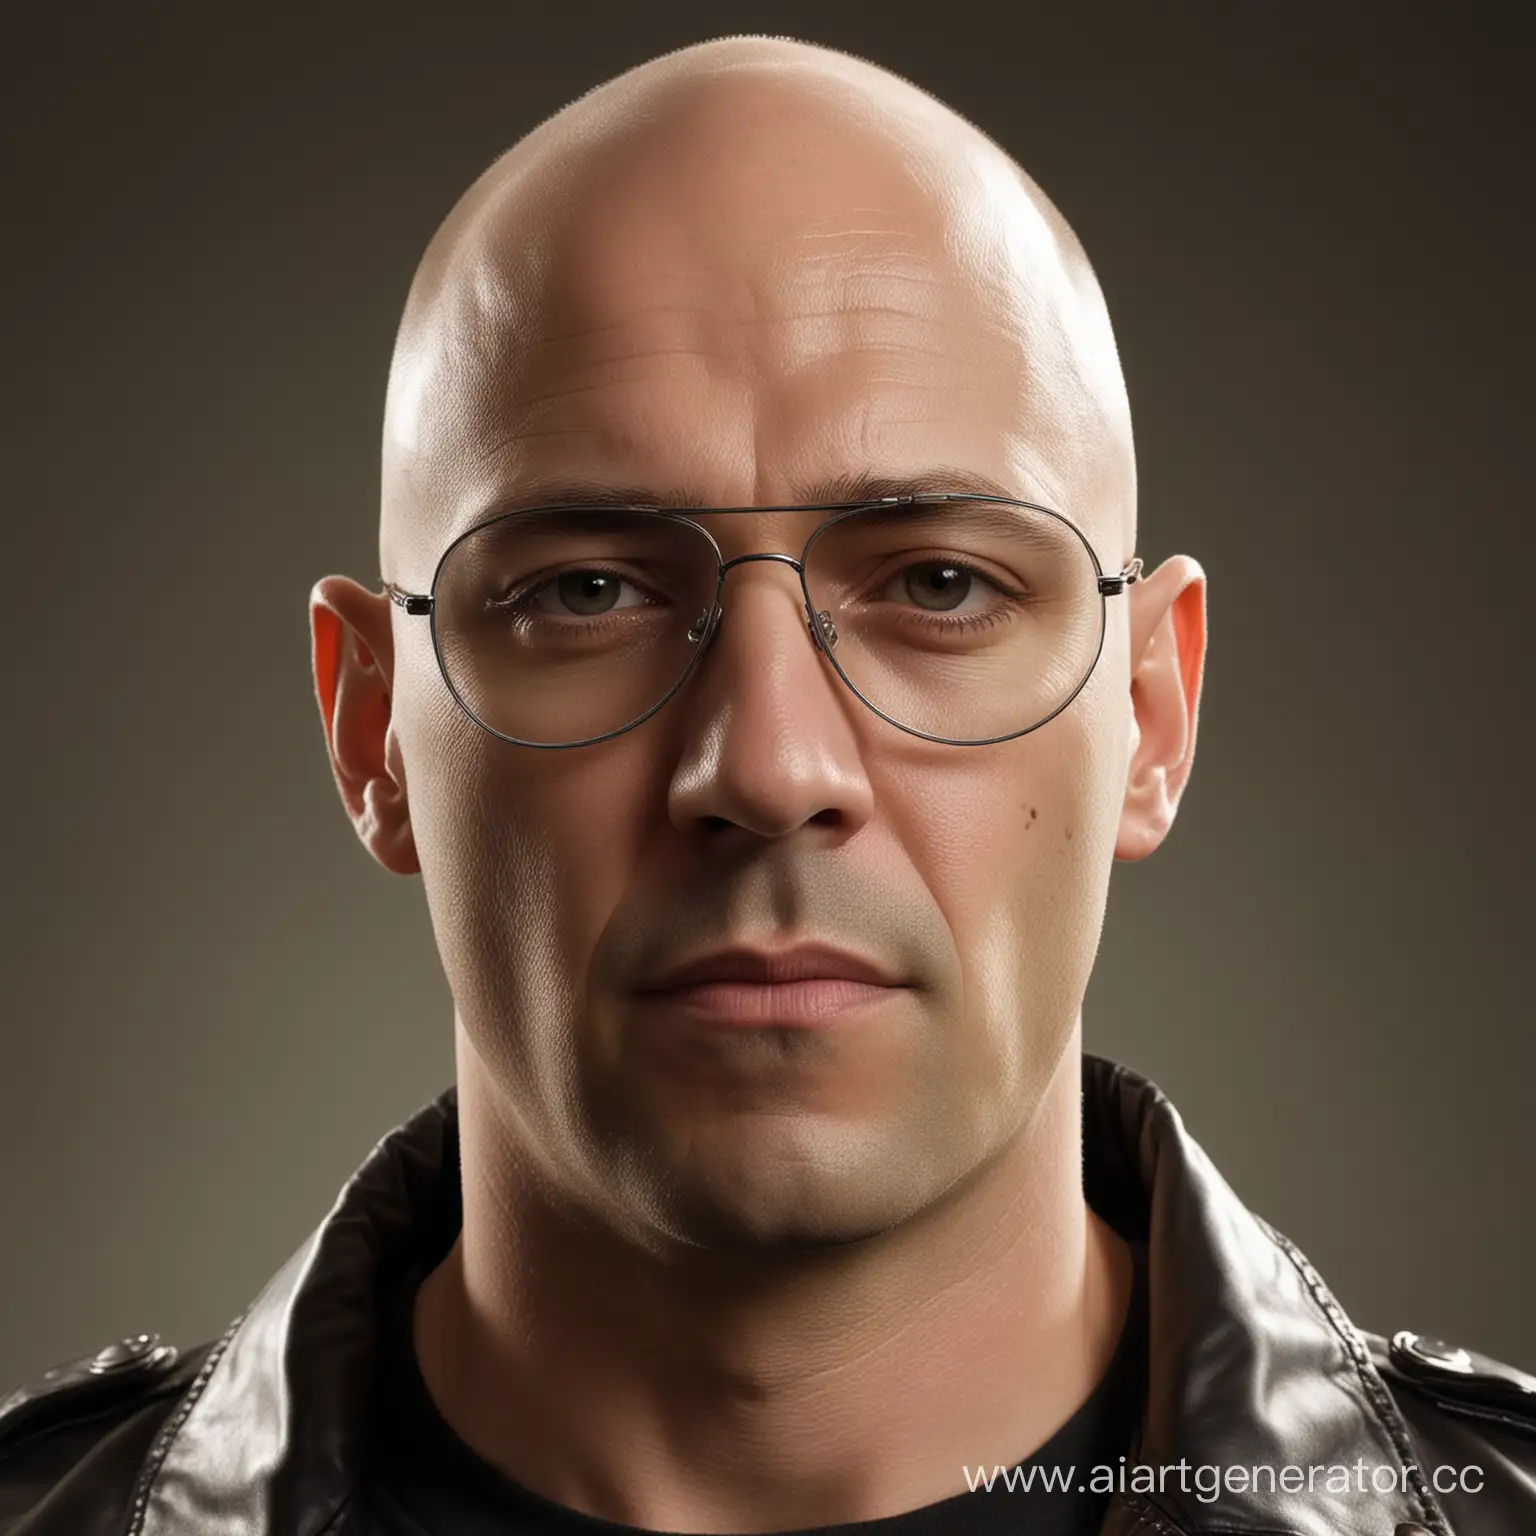 Bald-Man-with-Aviator-Glasses-Urban-Rebel-in-Leather-Jacket